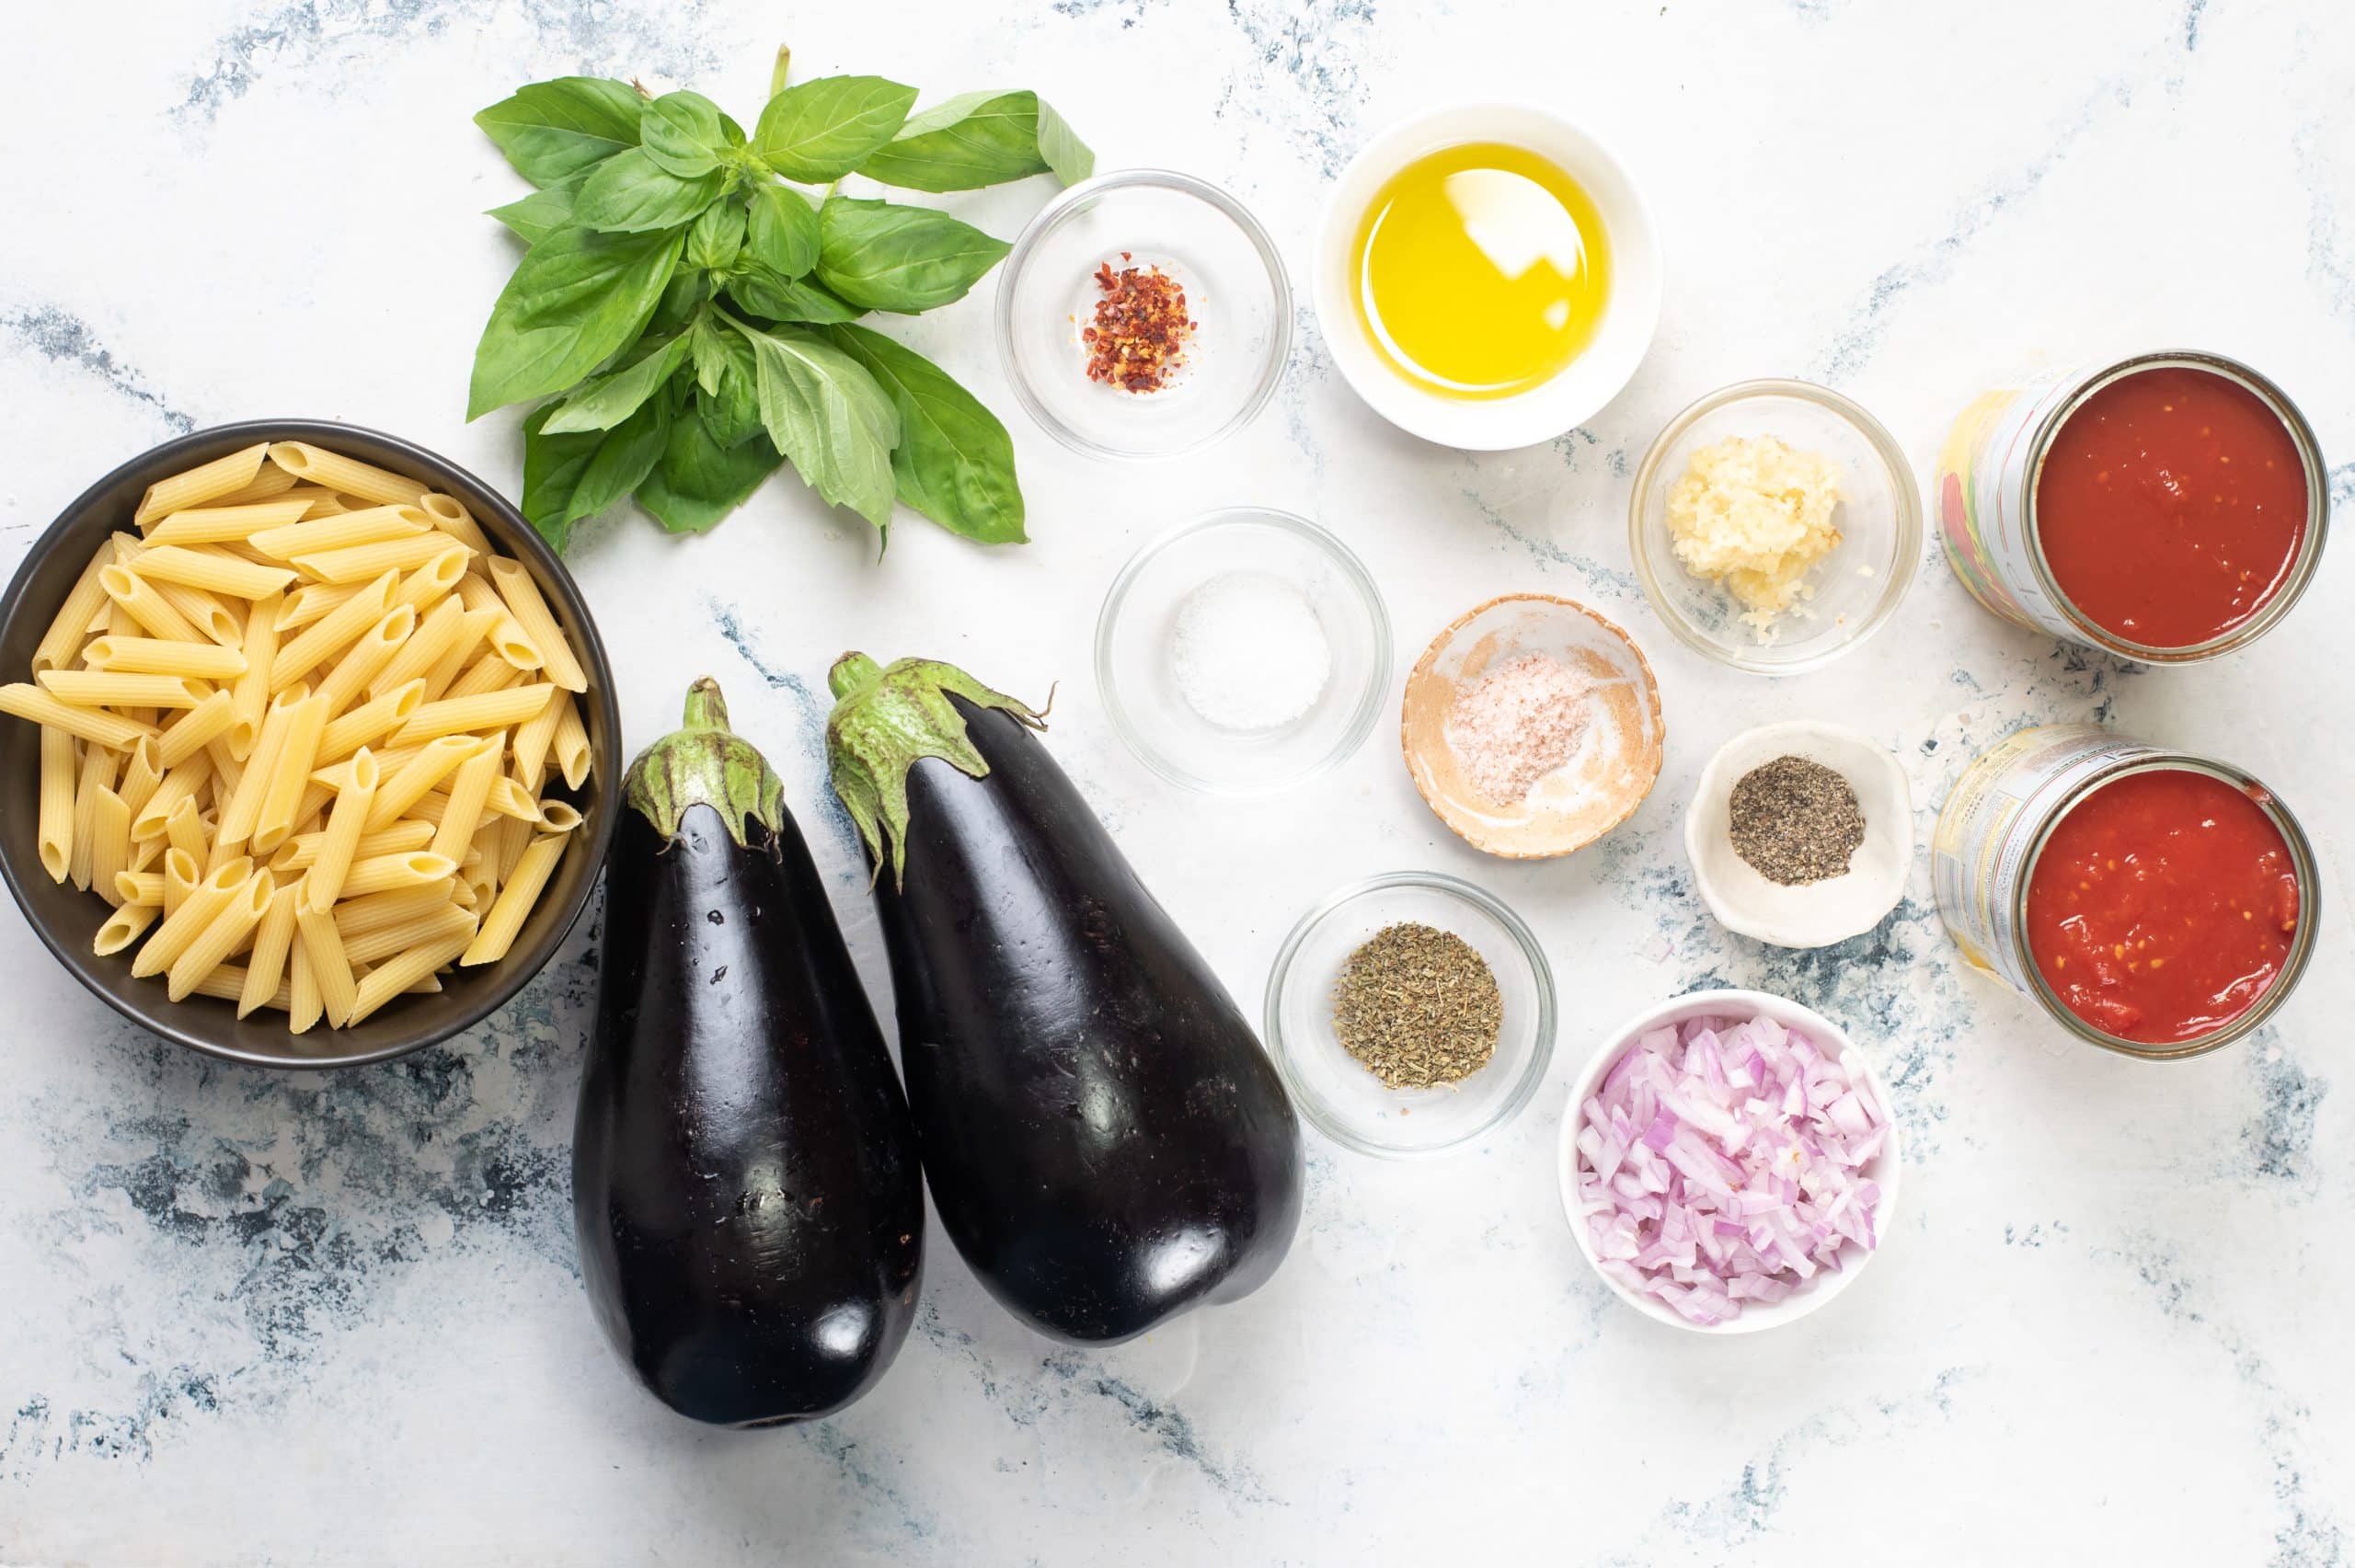 Ingredients to make Pasta Alla Norma - pasta, eggplant, cheese, basil, tomato as classic ingredients